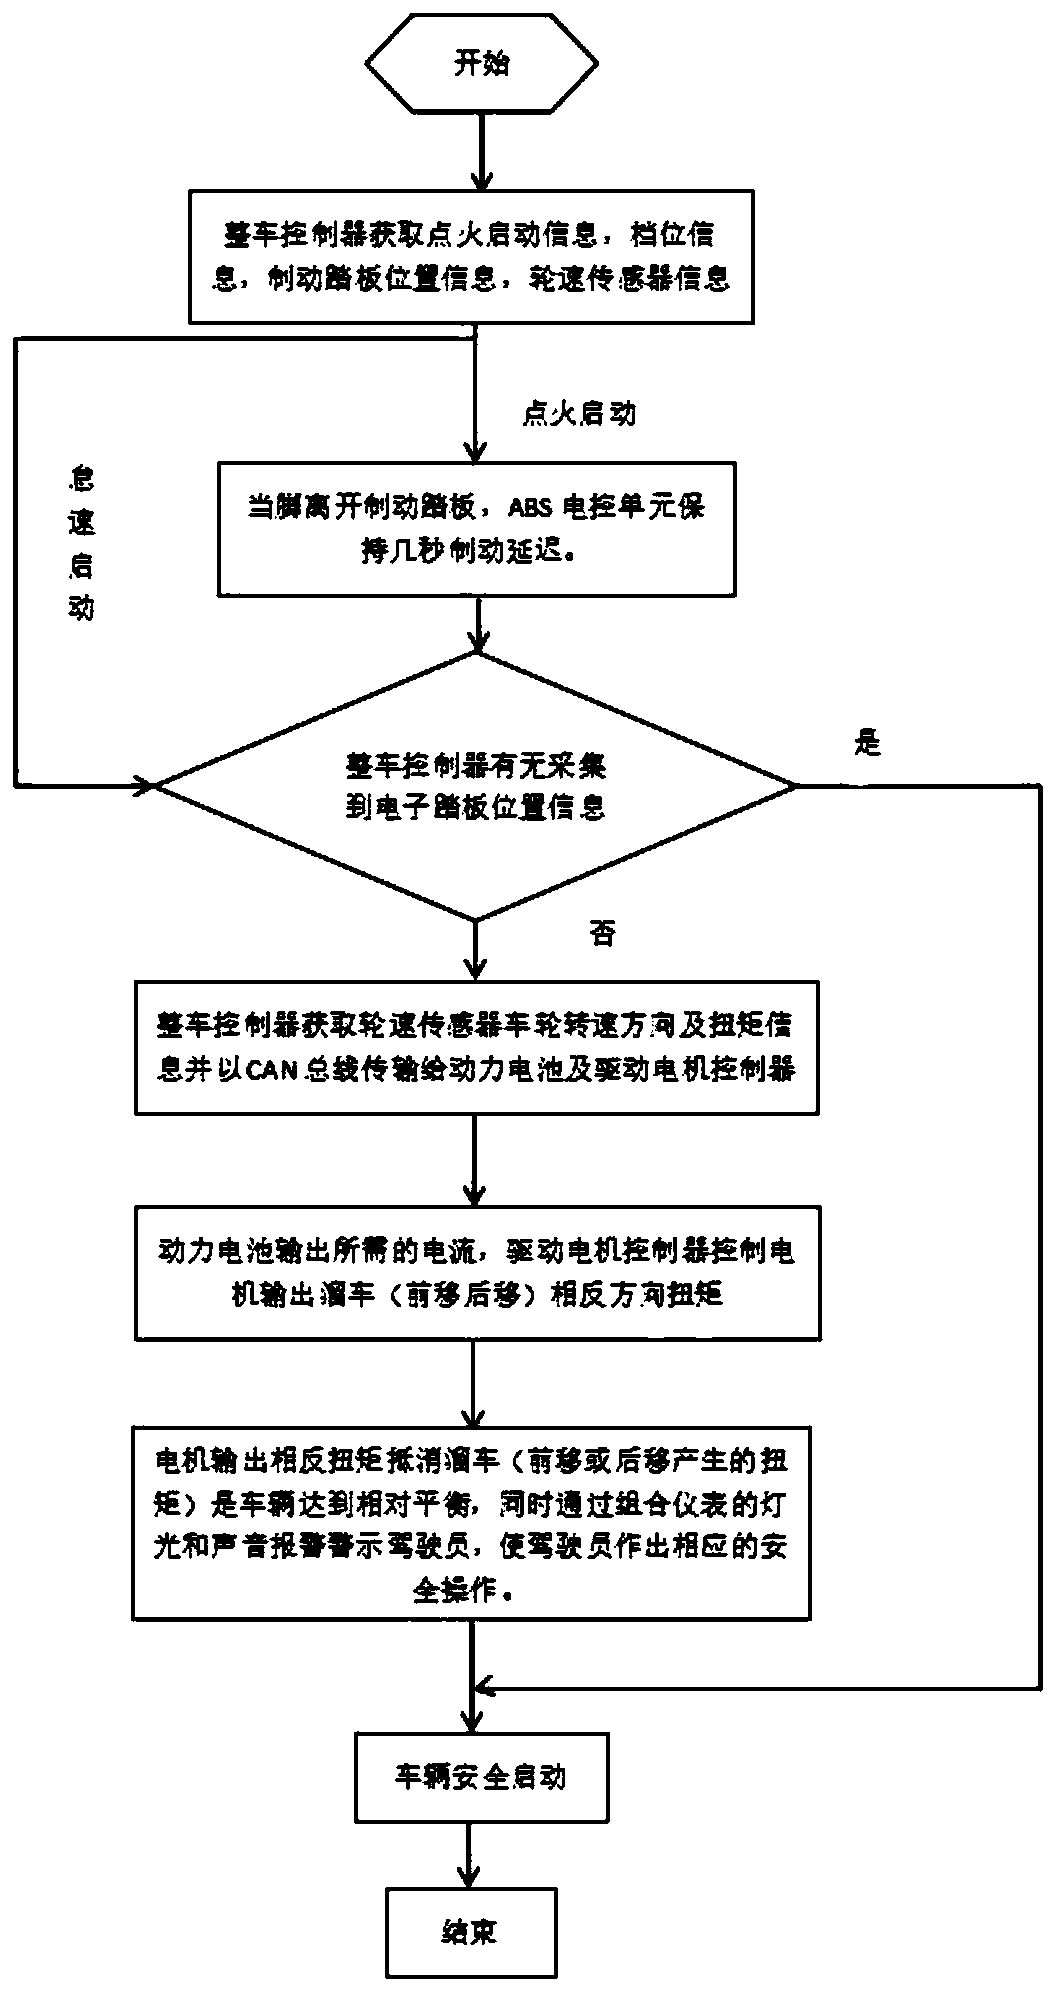 Electric vehicle starting/parking anti-sliding early warning method and system